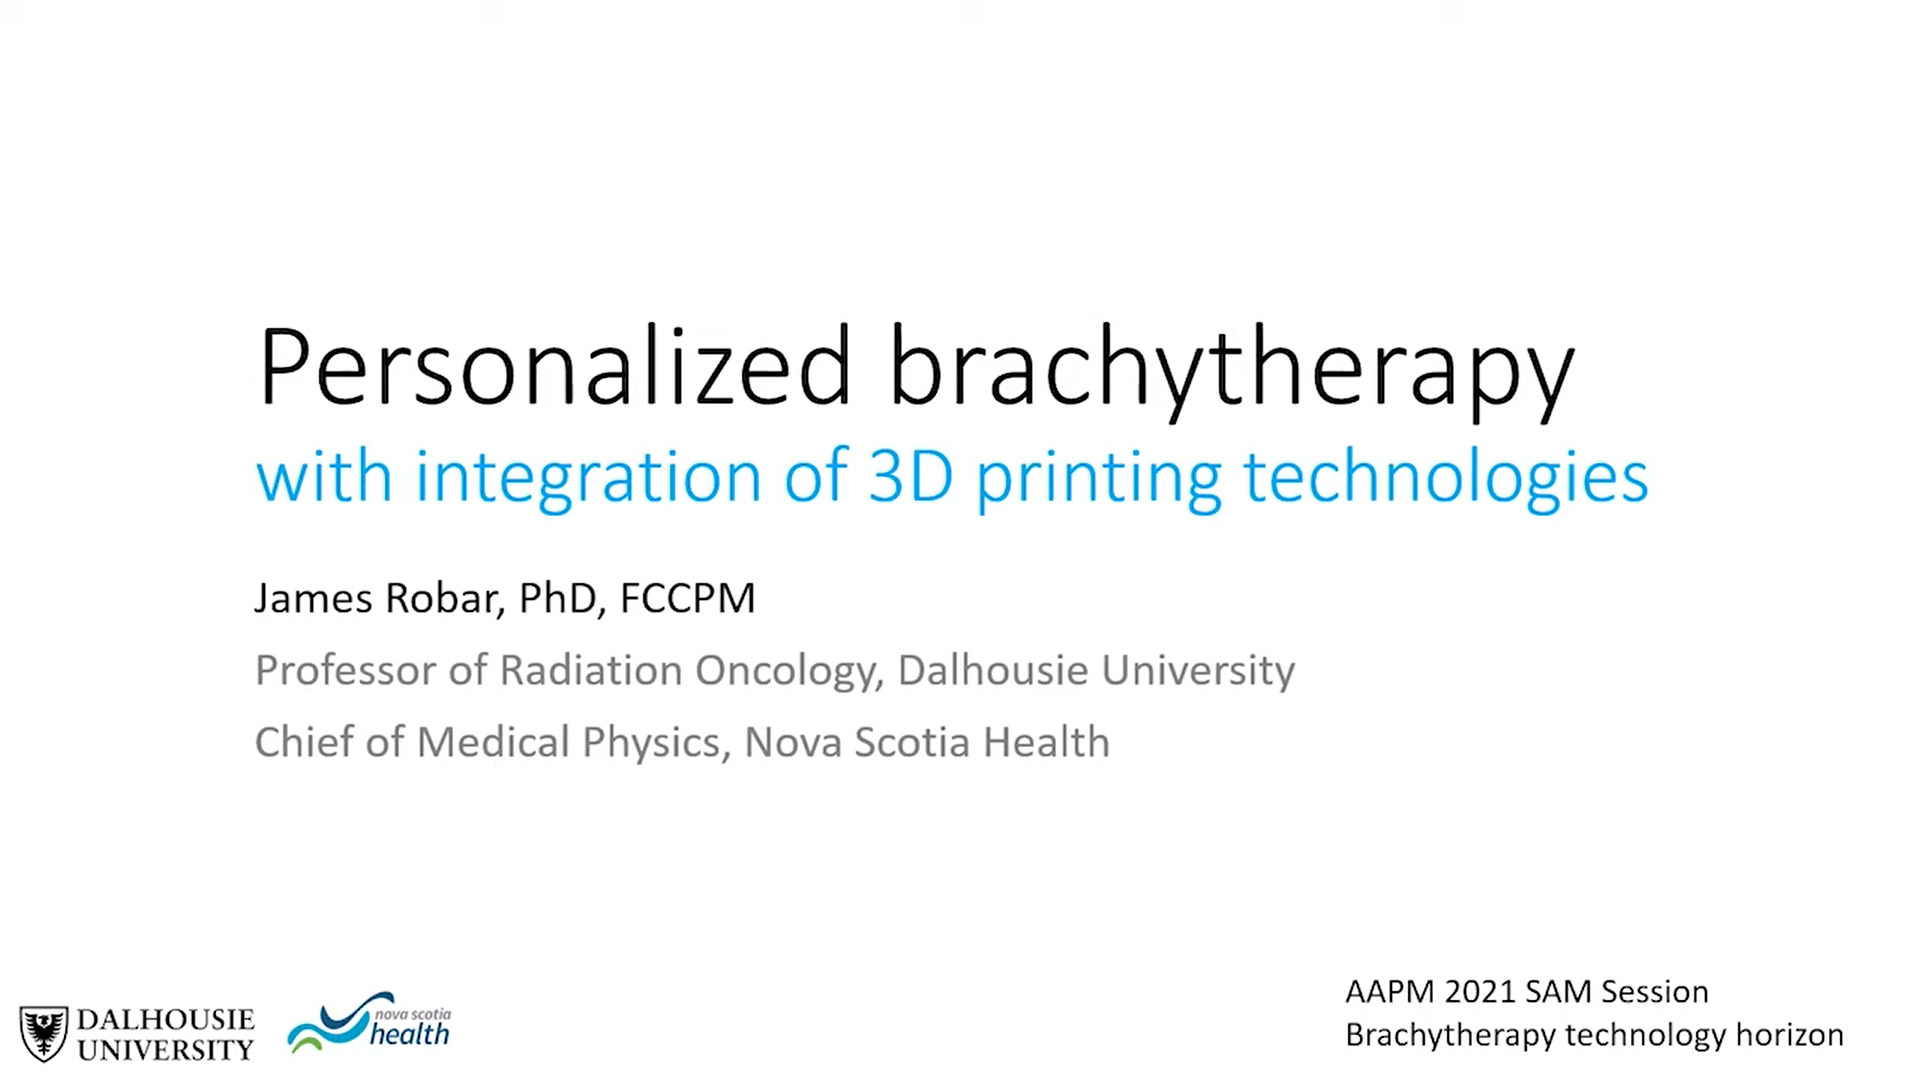 A review of the state of the art in 3D printing and clinical applications in brachytherapy as this technology has progressed at an impressive pace in the last few years. There are vast range of materials and printers to consider, and at least, one commercial solution available. It is poised to revolutionize the field and hence is a timely topic. Key benefits of using 3D printing in brachytherapy are dosimetric advantages, improved patient experience, ease of use, and increased efficiency by digitizing manual processes.